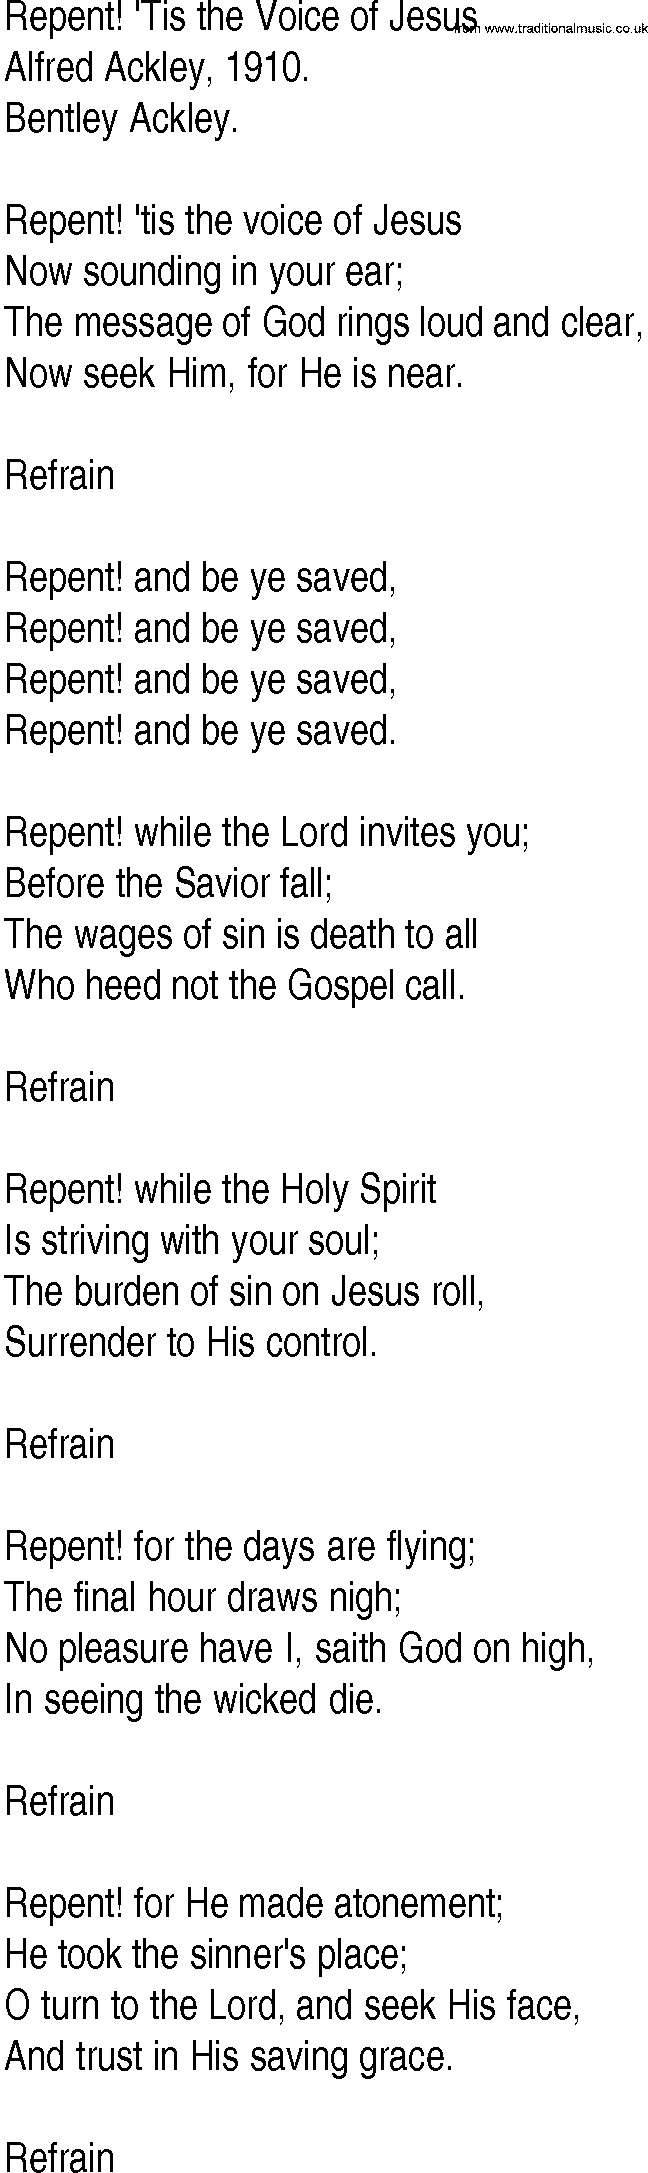 Hymn and Gospel Song: Repent! 'Tis the Voice of Jesus by Alfred Ackley lyrics